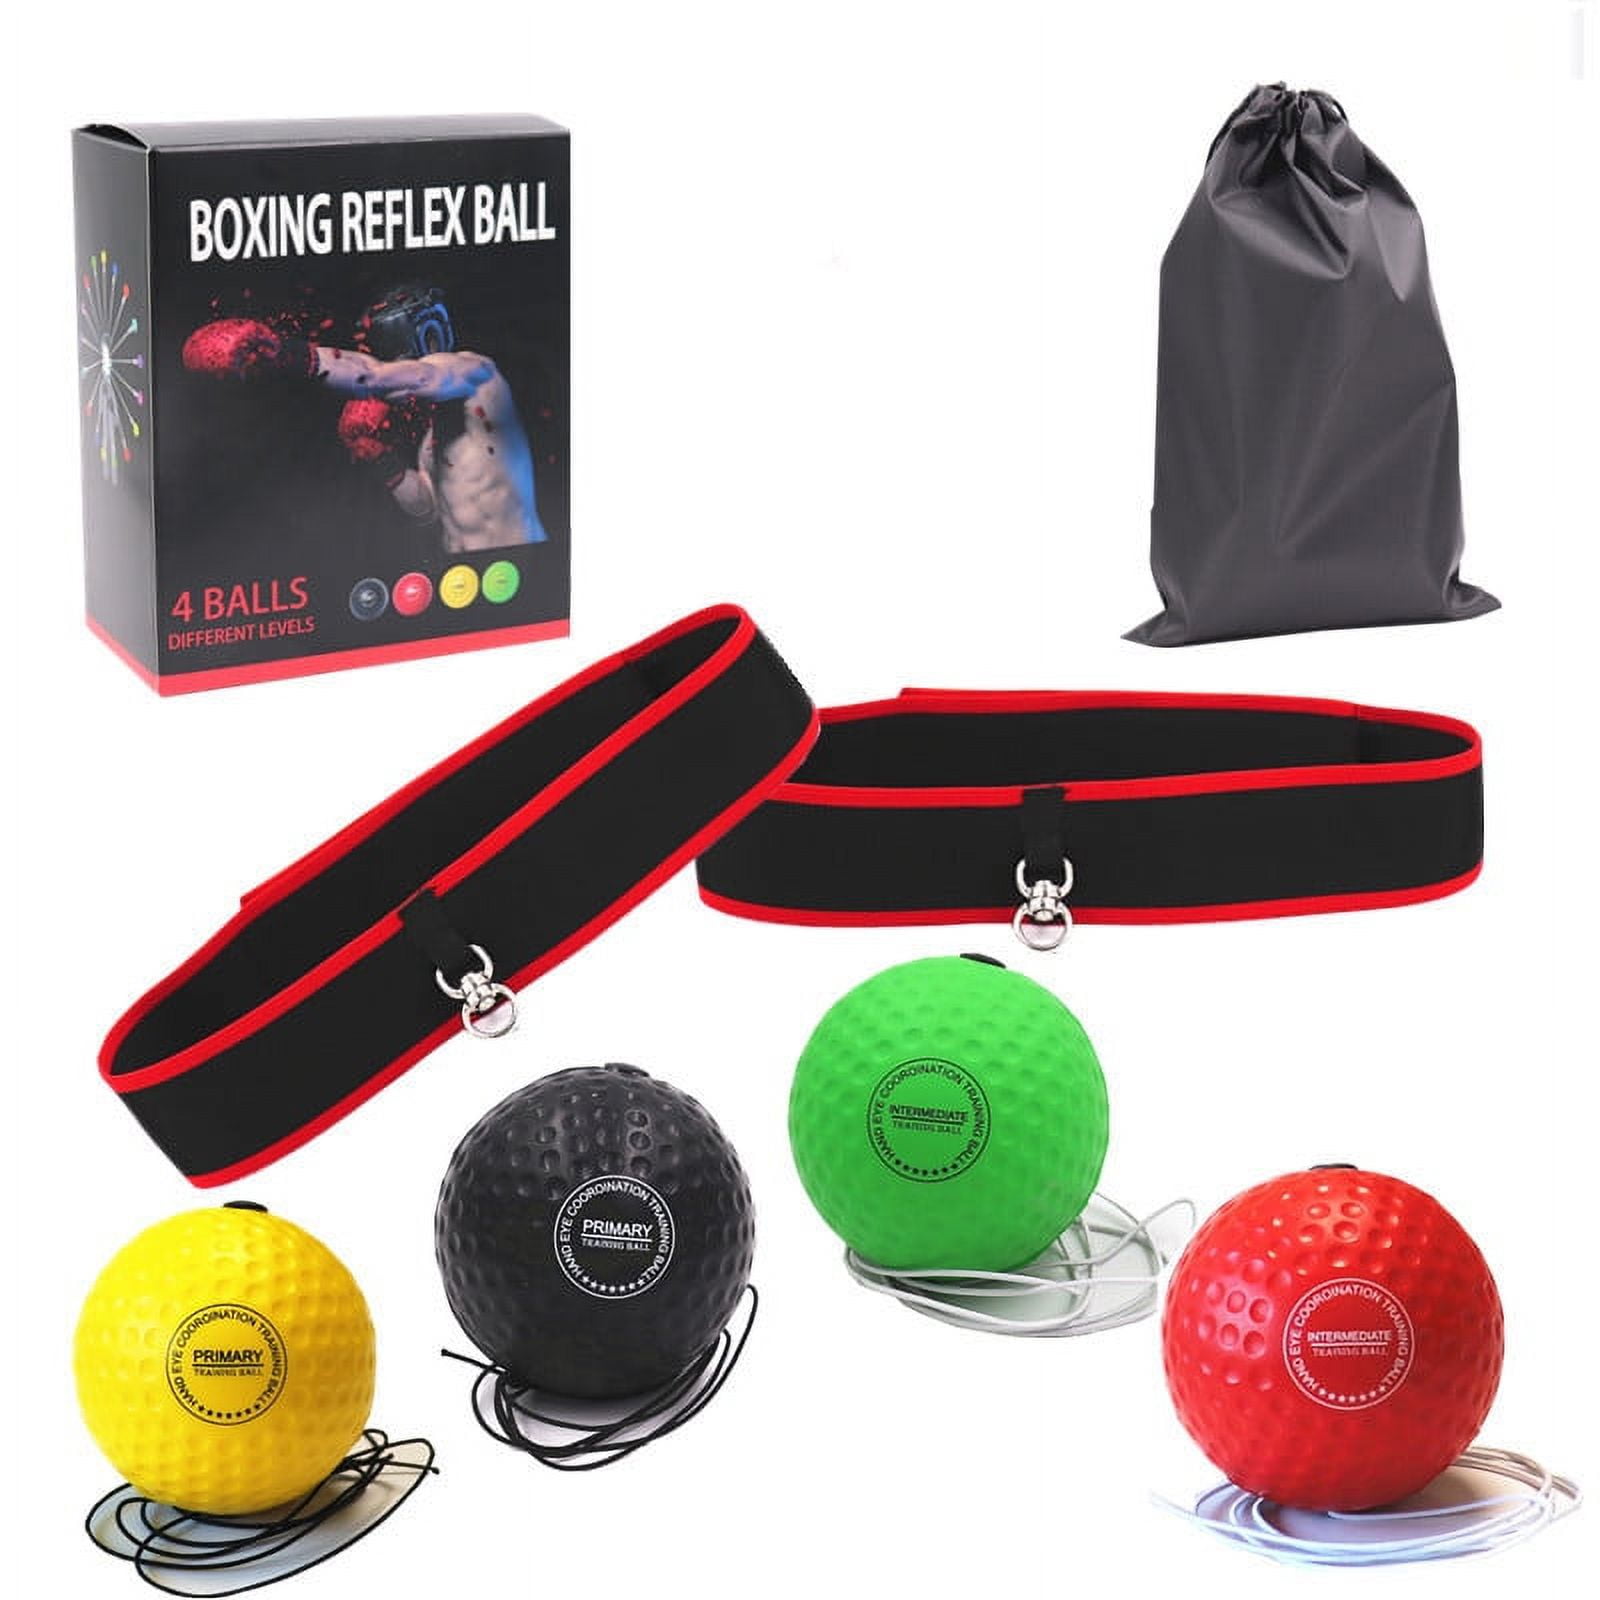 Boxing Reflex Ball Family Pack, 2 Adjustable Headbands + 2 Novice Reflex  Balls + 1 Veteran Reflex Ball + 1 Boxer Reflex Ball and More